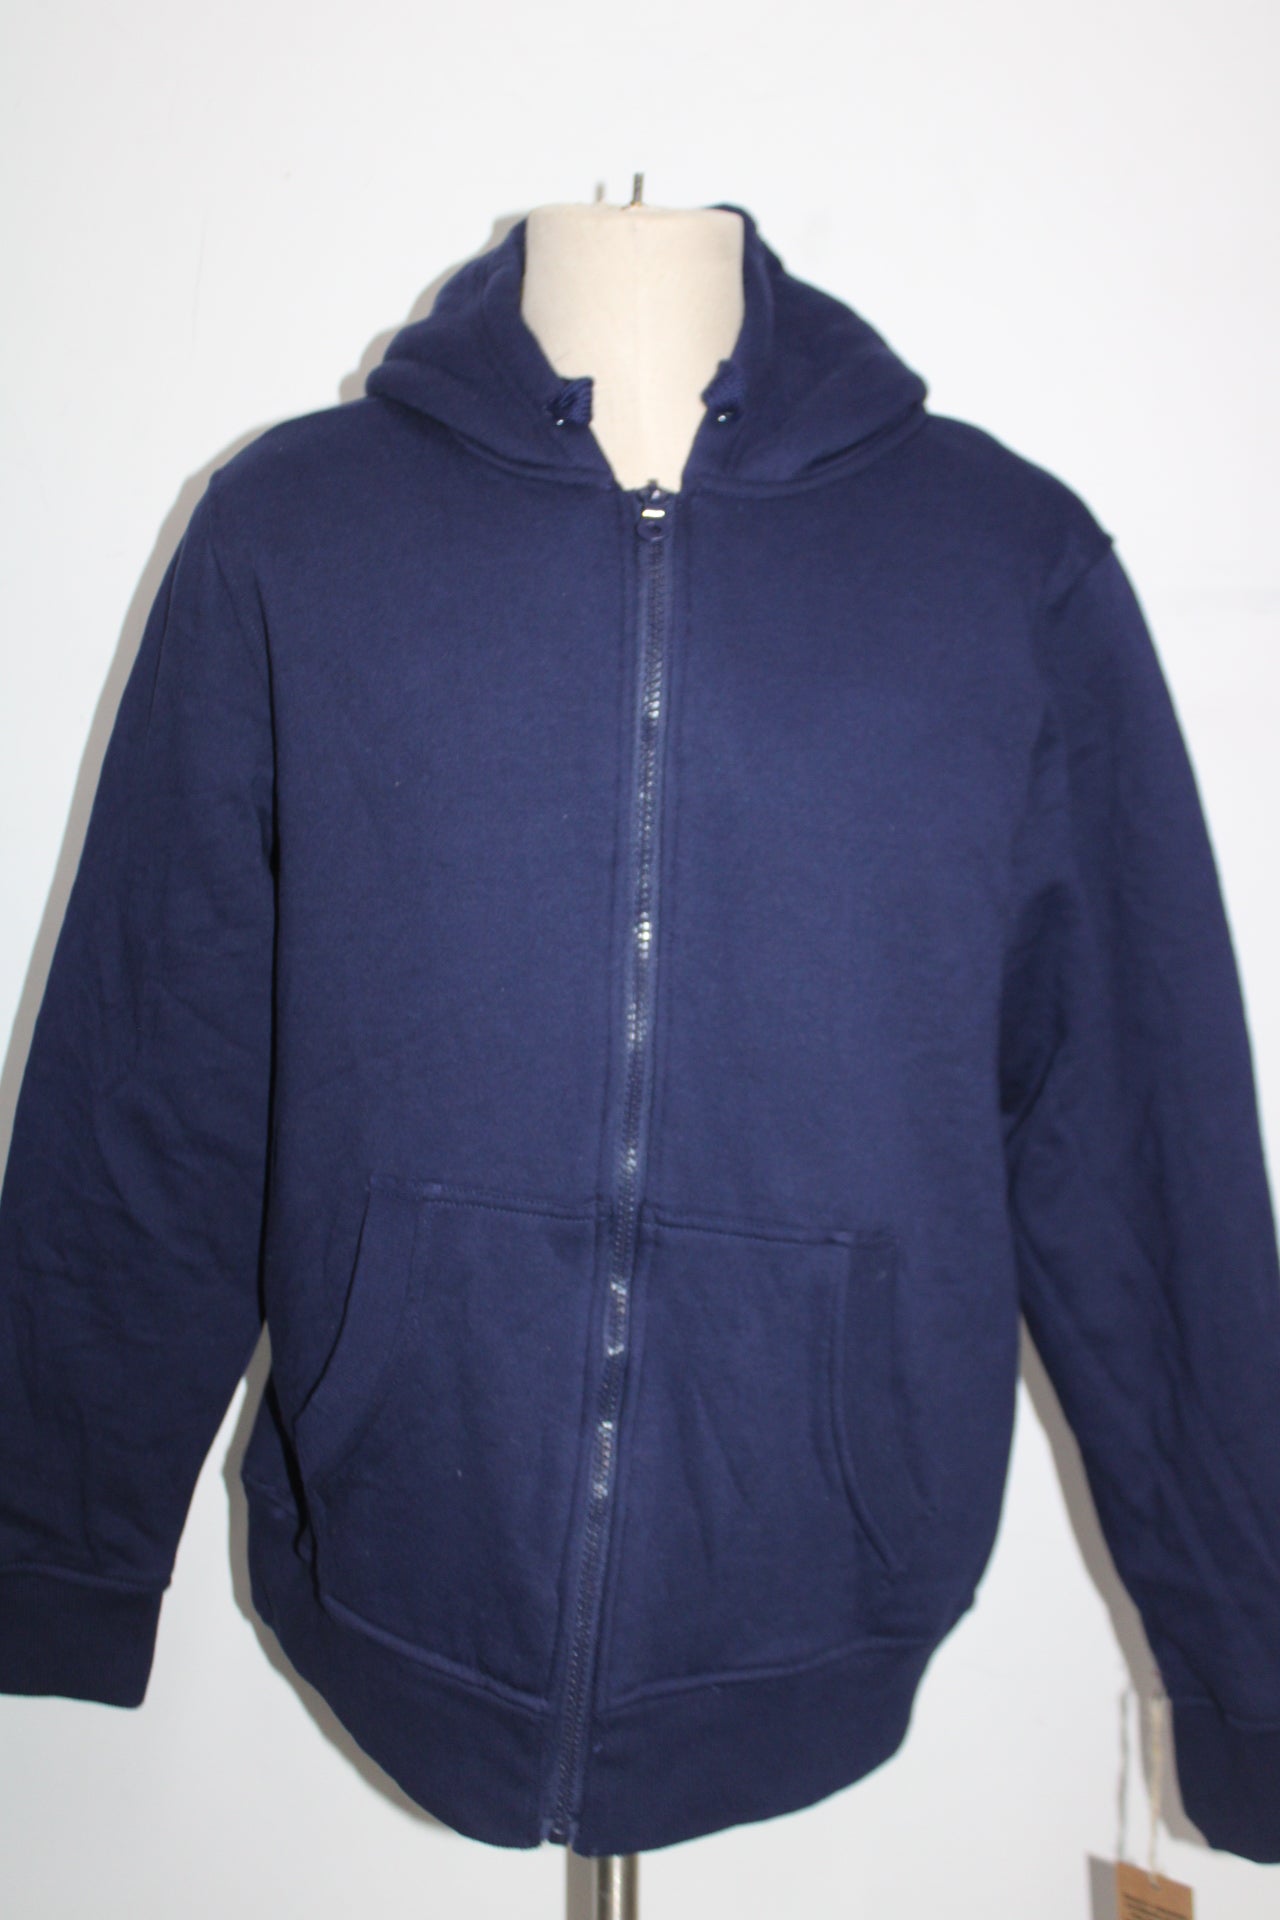 SANDIA MOUNTAIN MEN ZIPPER HOODIE, NAVY, LARGE - NEW WITHOUT TAG  14012